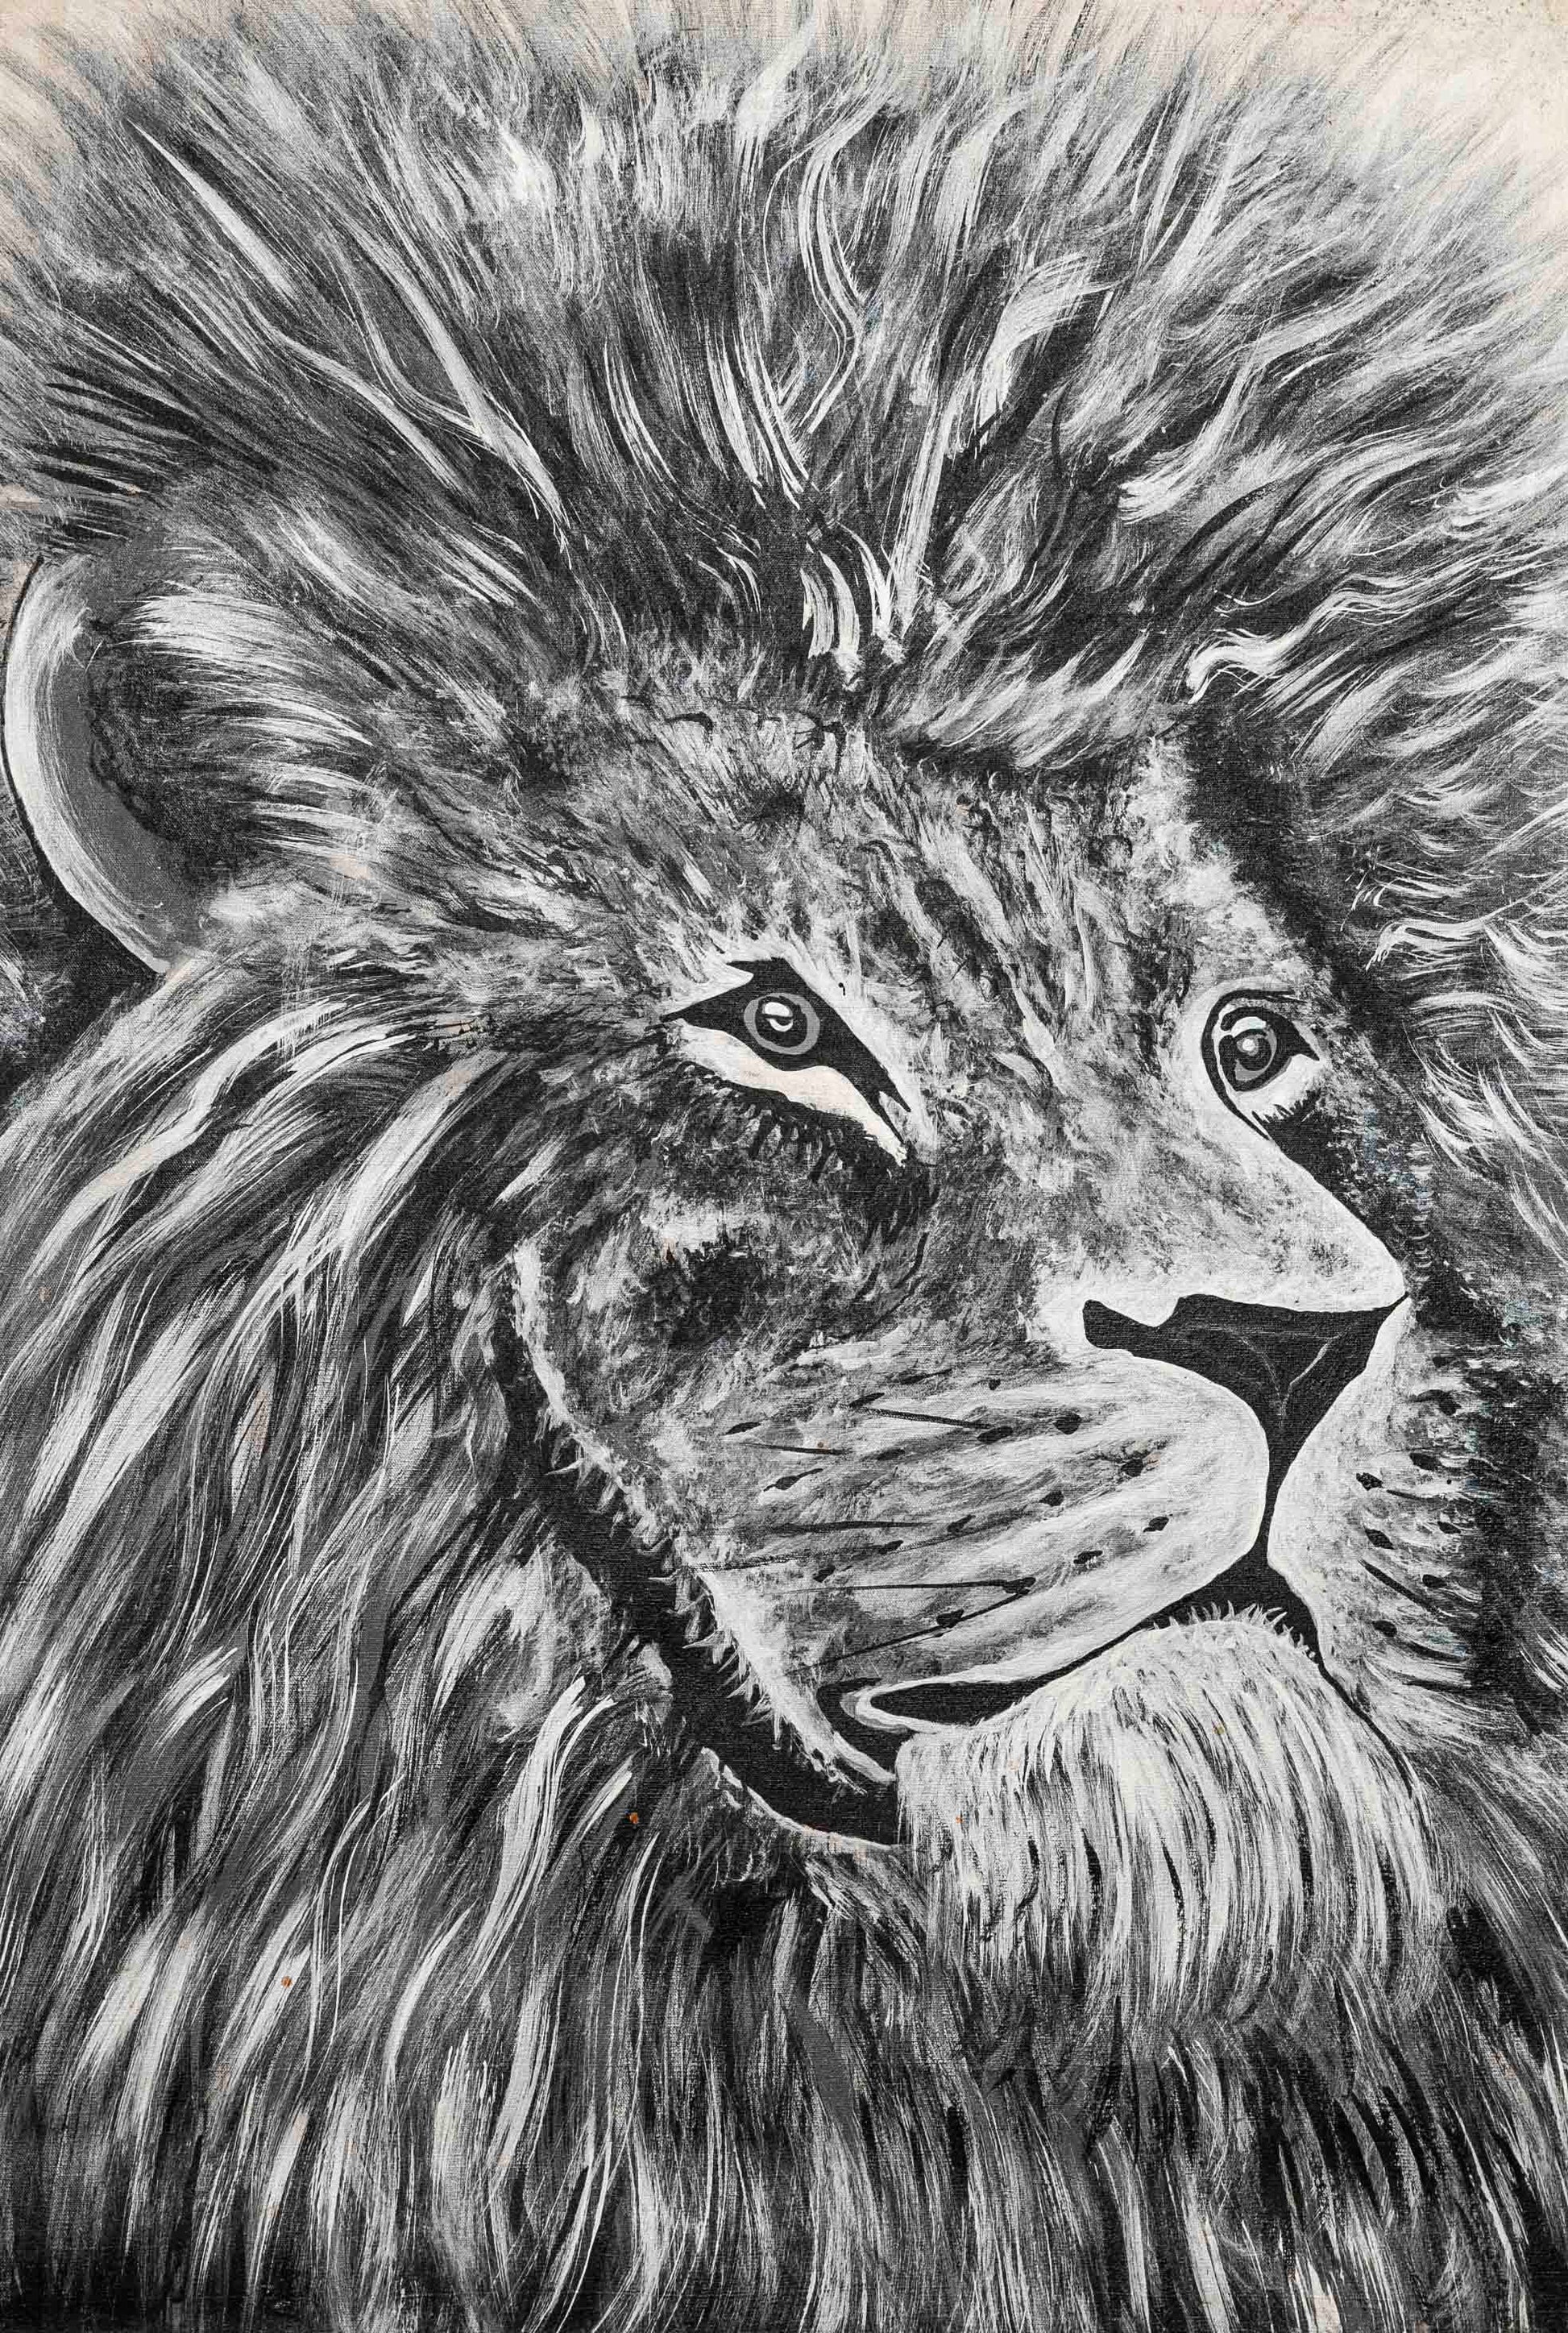 Black & White Lion - Authentic African handicrafts | Clothing, bags, painting, toys & more - CULTURE HUB by Muthoni Unchained